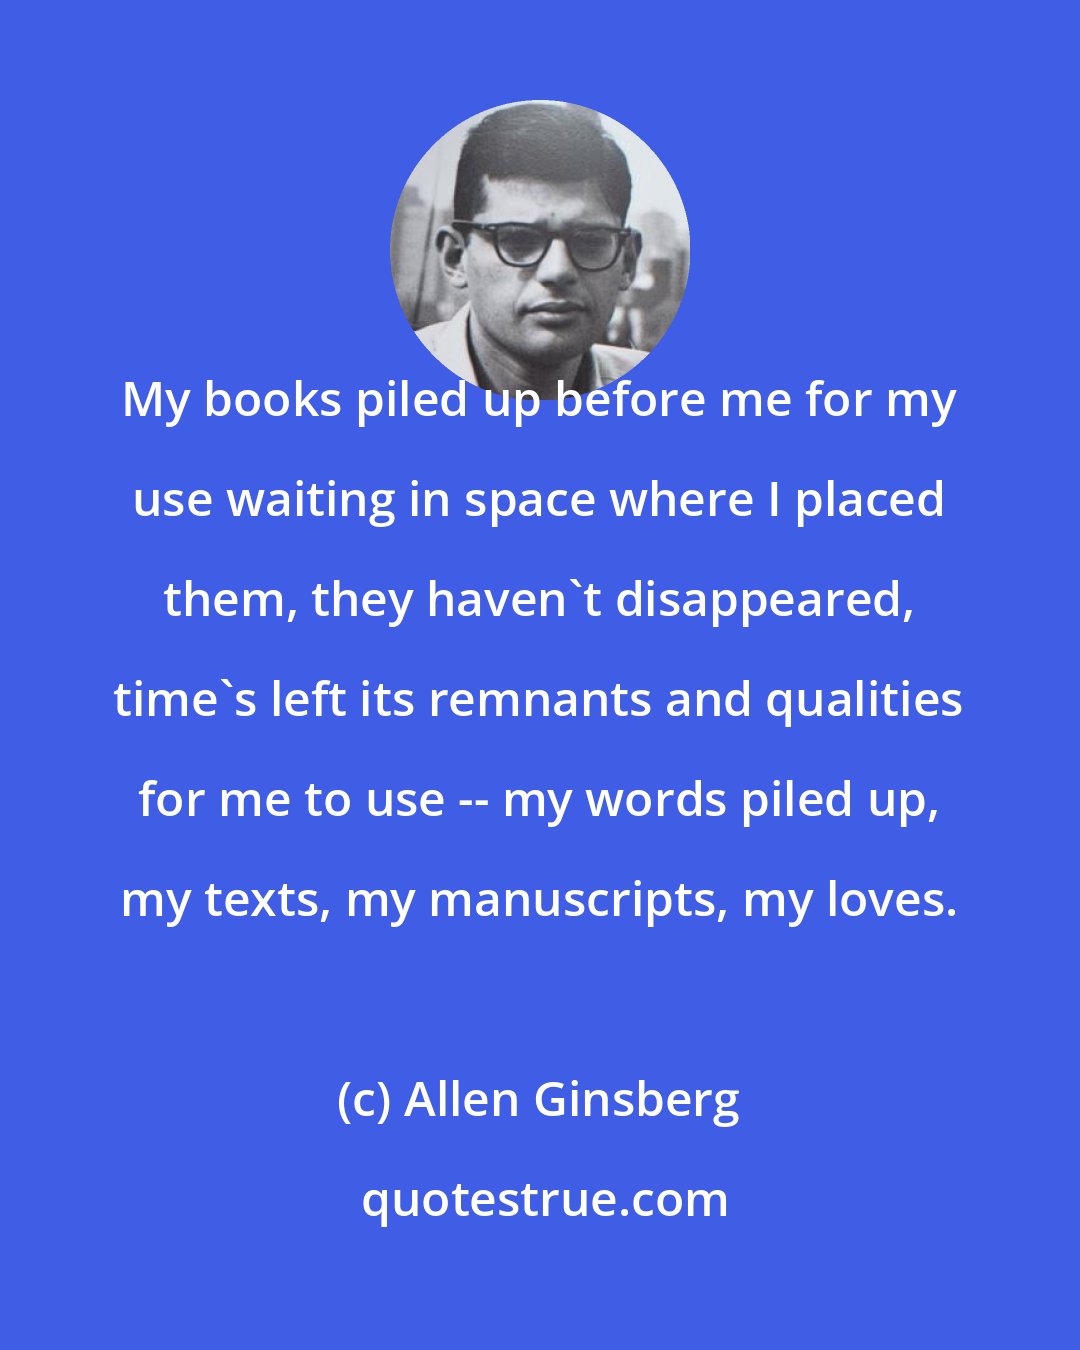 Allen Ginsberg: My books piled up before me for my use waiting in space where I placed them, they haven't disappeared, time's left its remnants and qualities for me to use -- my words piled up, my texts, my manuscripts, my loves.